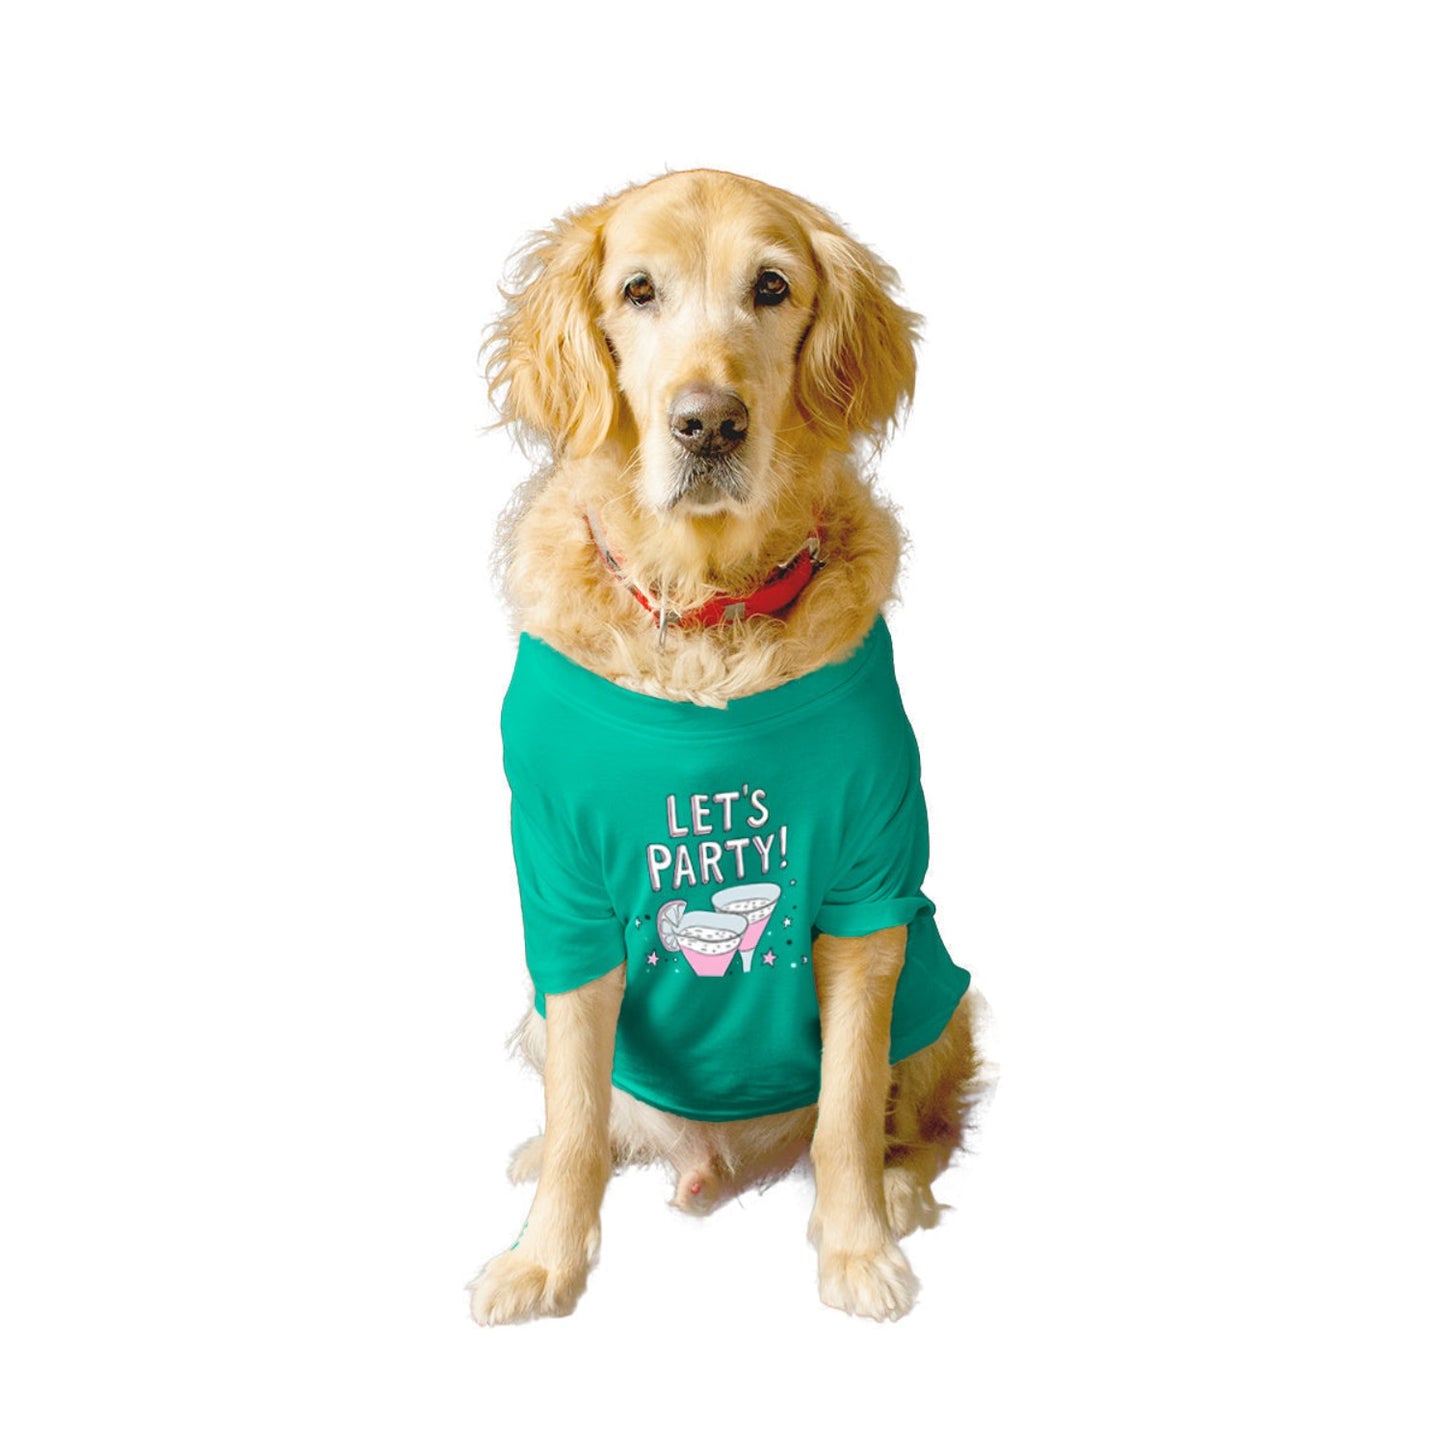 Ruse XX-Small (Chihuahuas, Papillons) / Aqua Green Ruse Basic Crew Neck "Let's Party" Printed Half Sleeves Dog Tee5